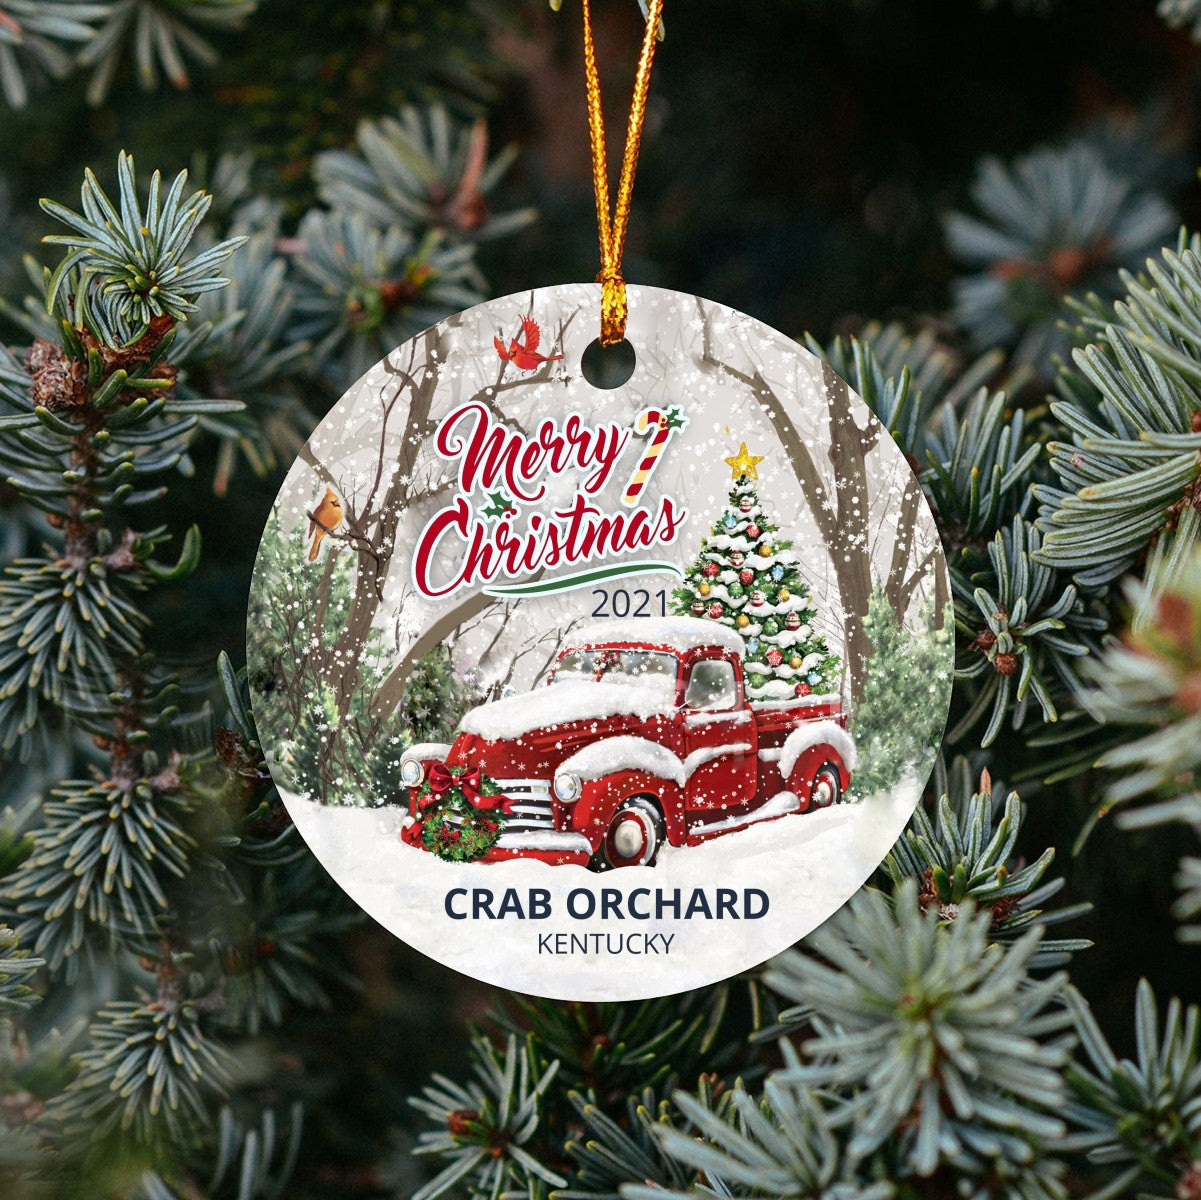 Christmas Tree Ornaments Crab Orchard - Ornament With Name City, State Crab Orchard Kentucky KY Ornament - Red Truck Xmas Ornaments 3'' Plastic Gift For Family, Friend And Housewarming